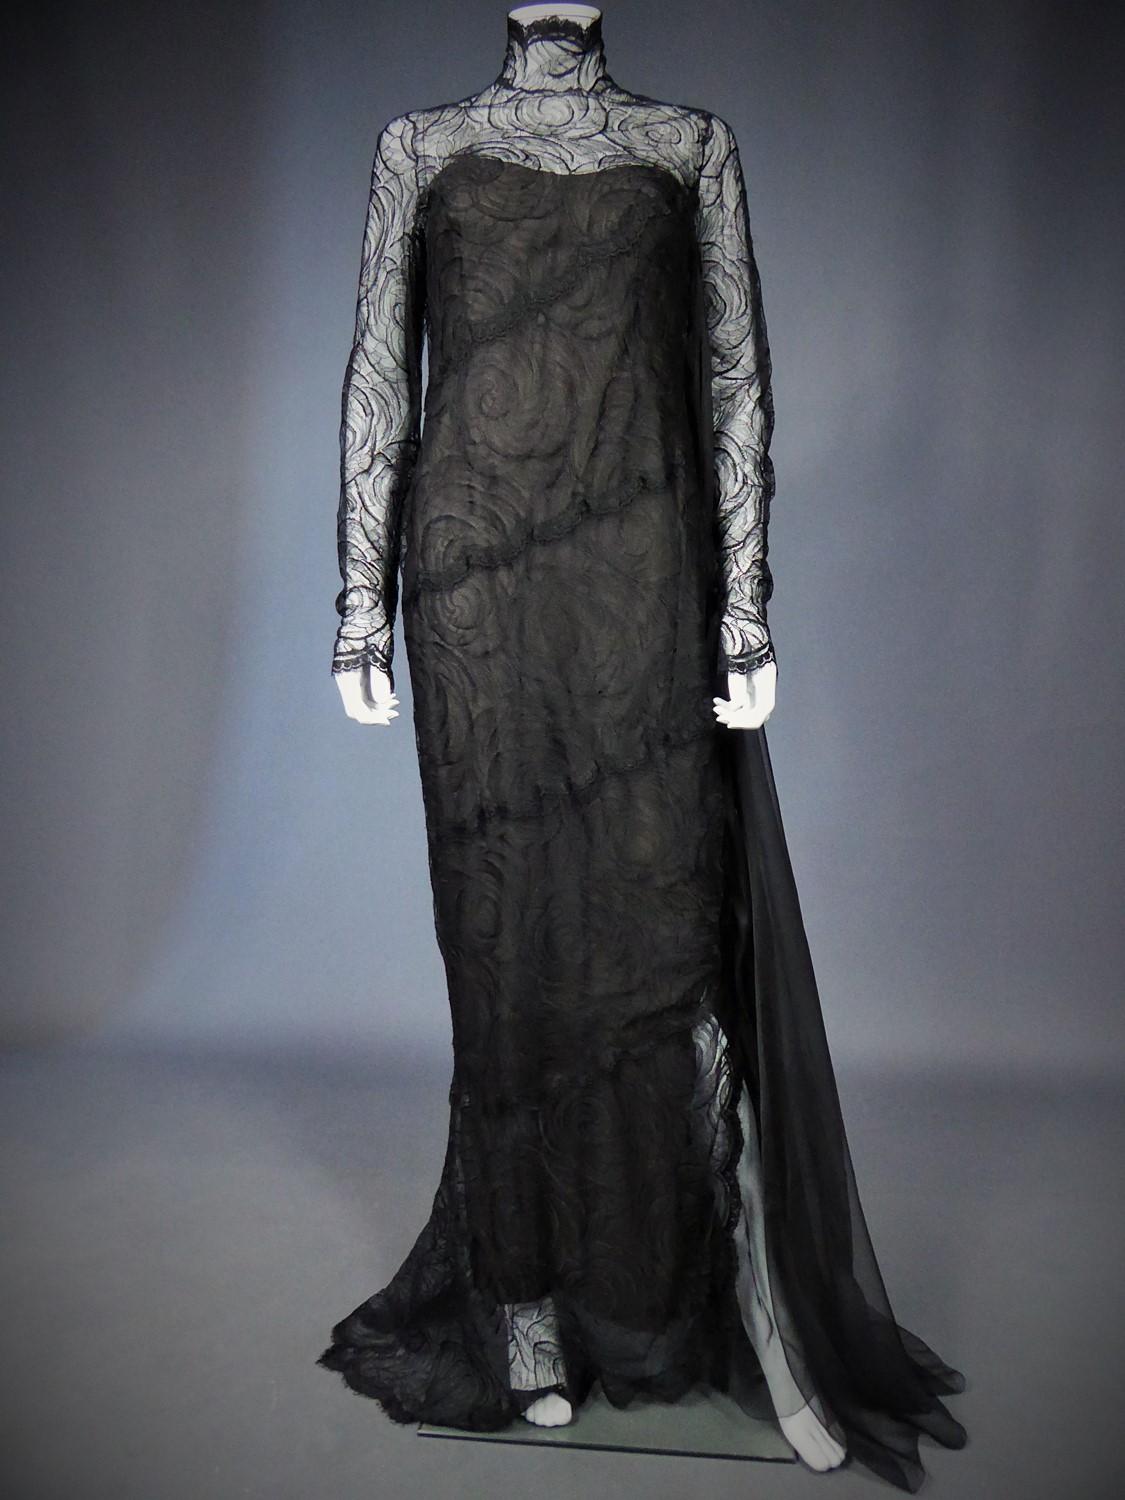 A Chanel Haute Couture Evening Dress by Karl Lagerfeld in Calais Lace Circa 1997 11